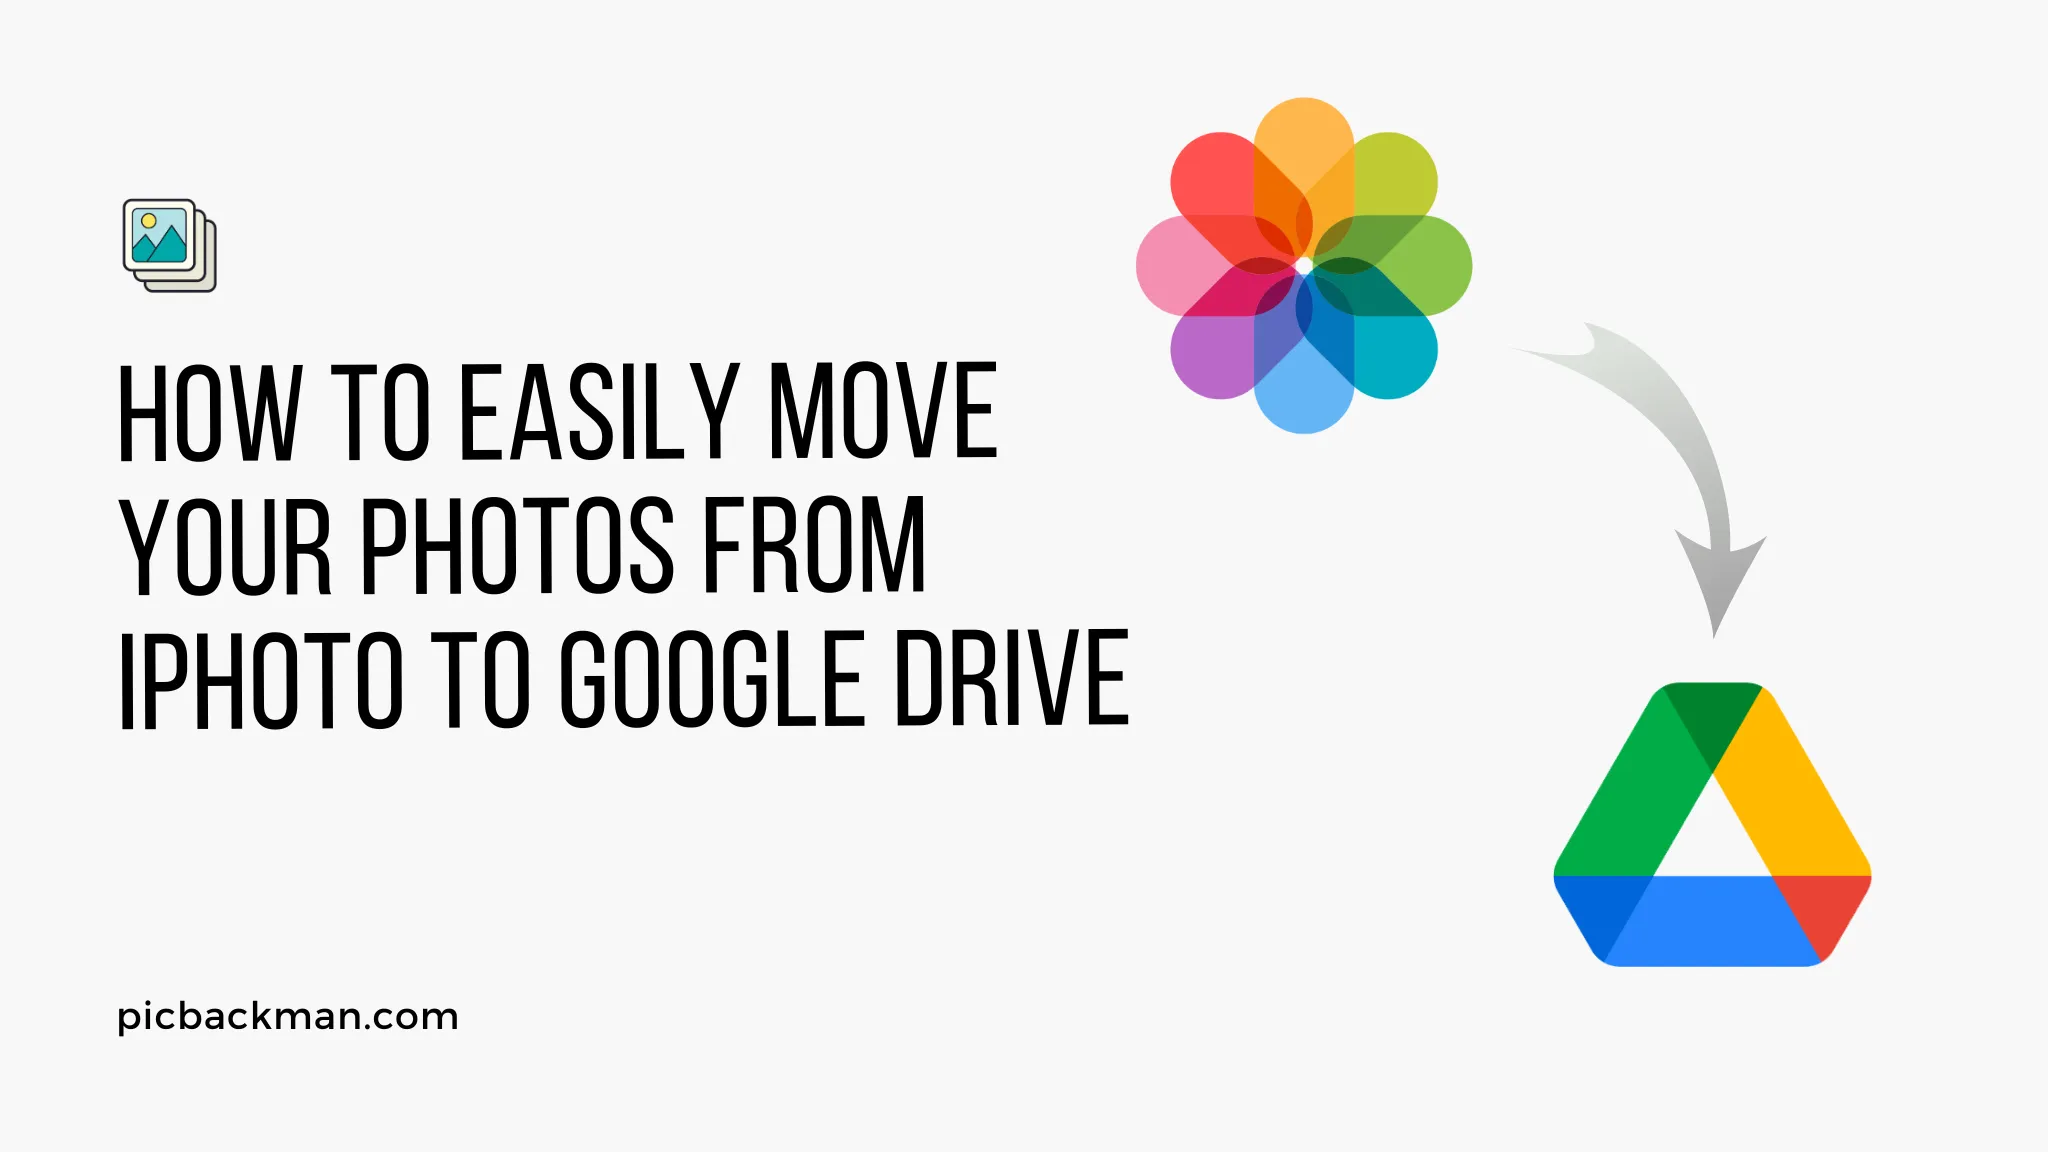 How to move photos from iPhoto to Google Drive?